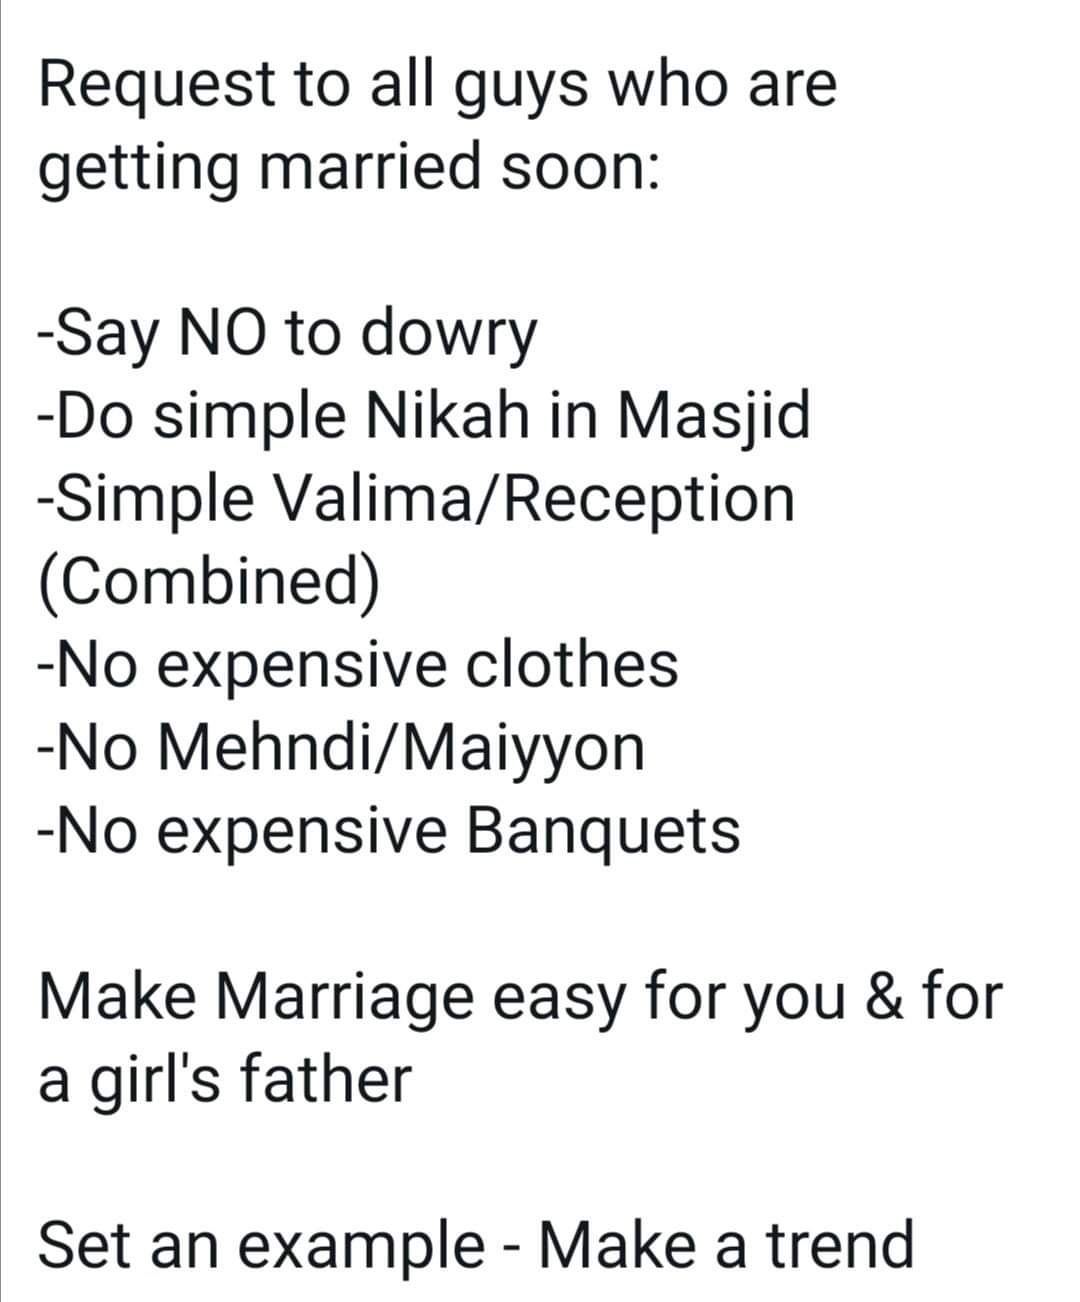 Marriage guidelines